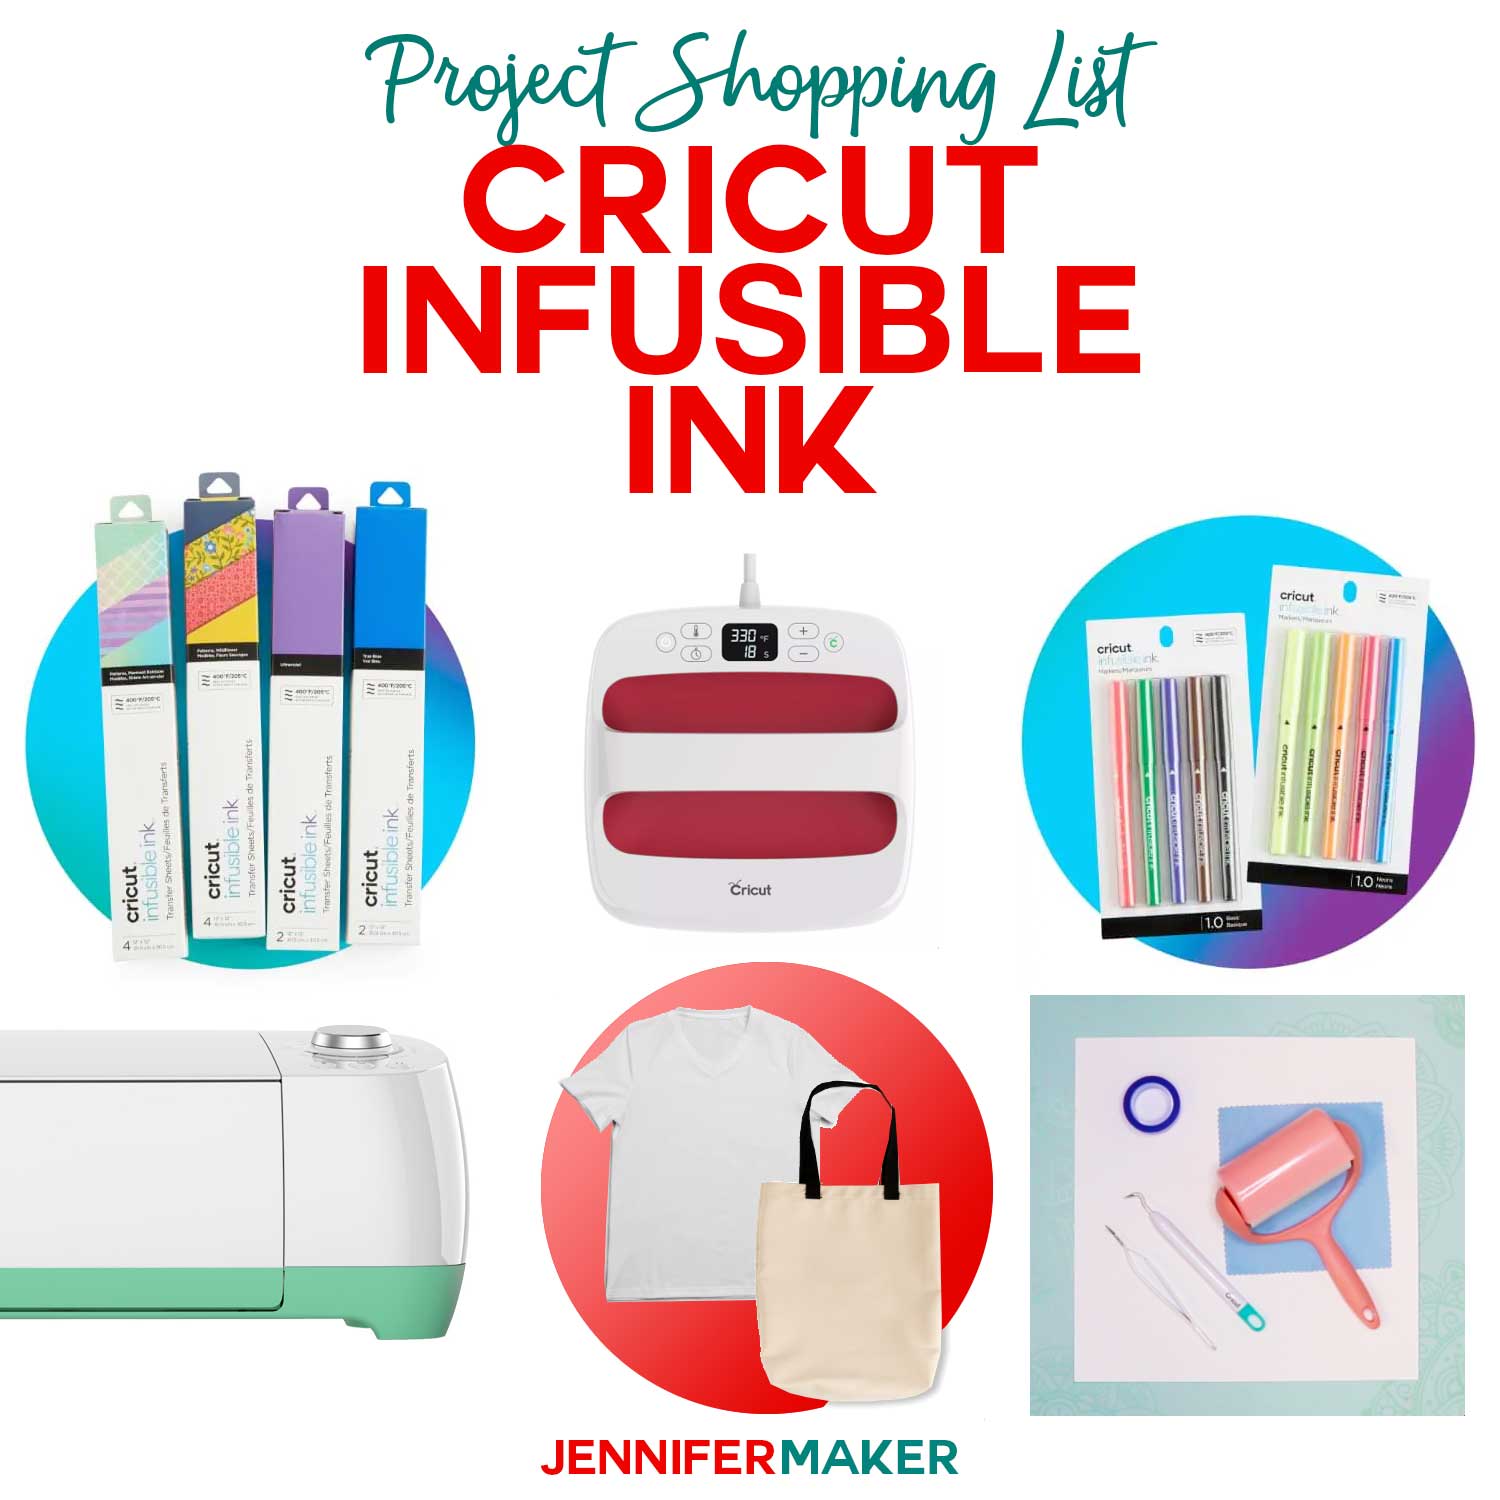 Cricut Infusible Ink: What You Need to Get Started